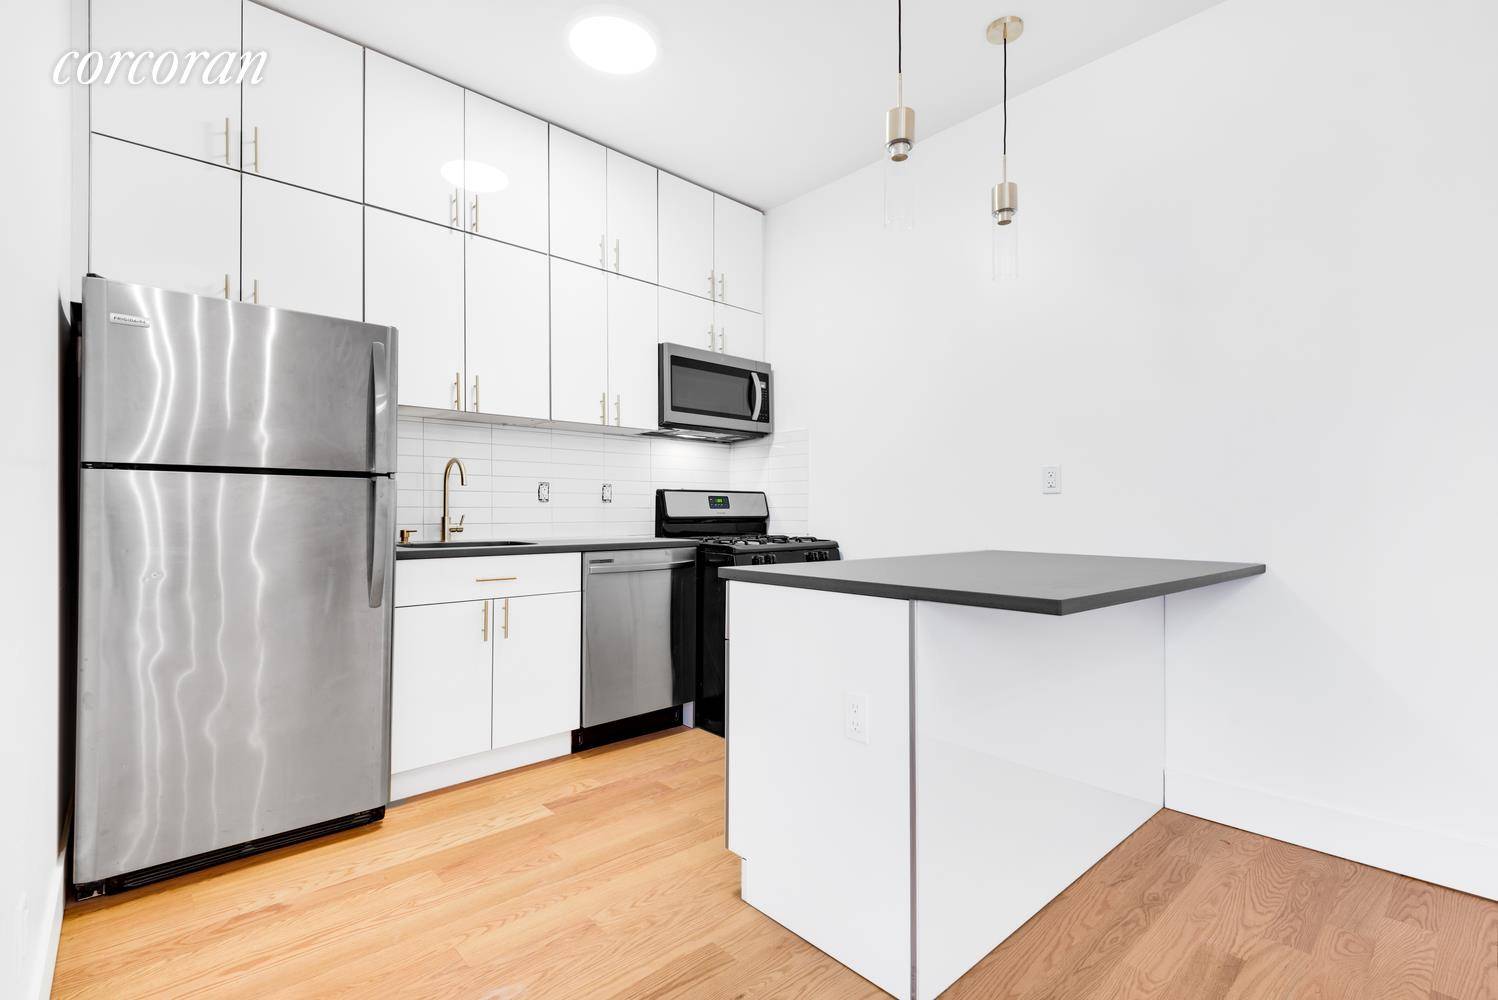 Stunning and Brand New Three Bedroom, two bath Home in the heart of Astoria right by the Steinway Street Train Station.